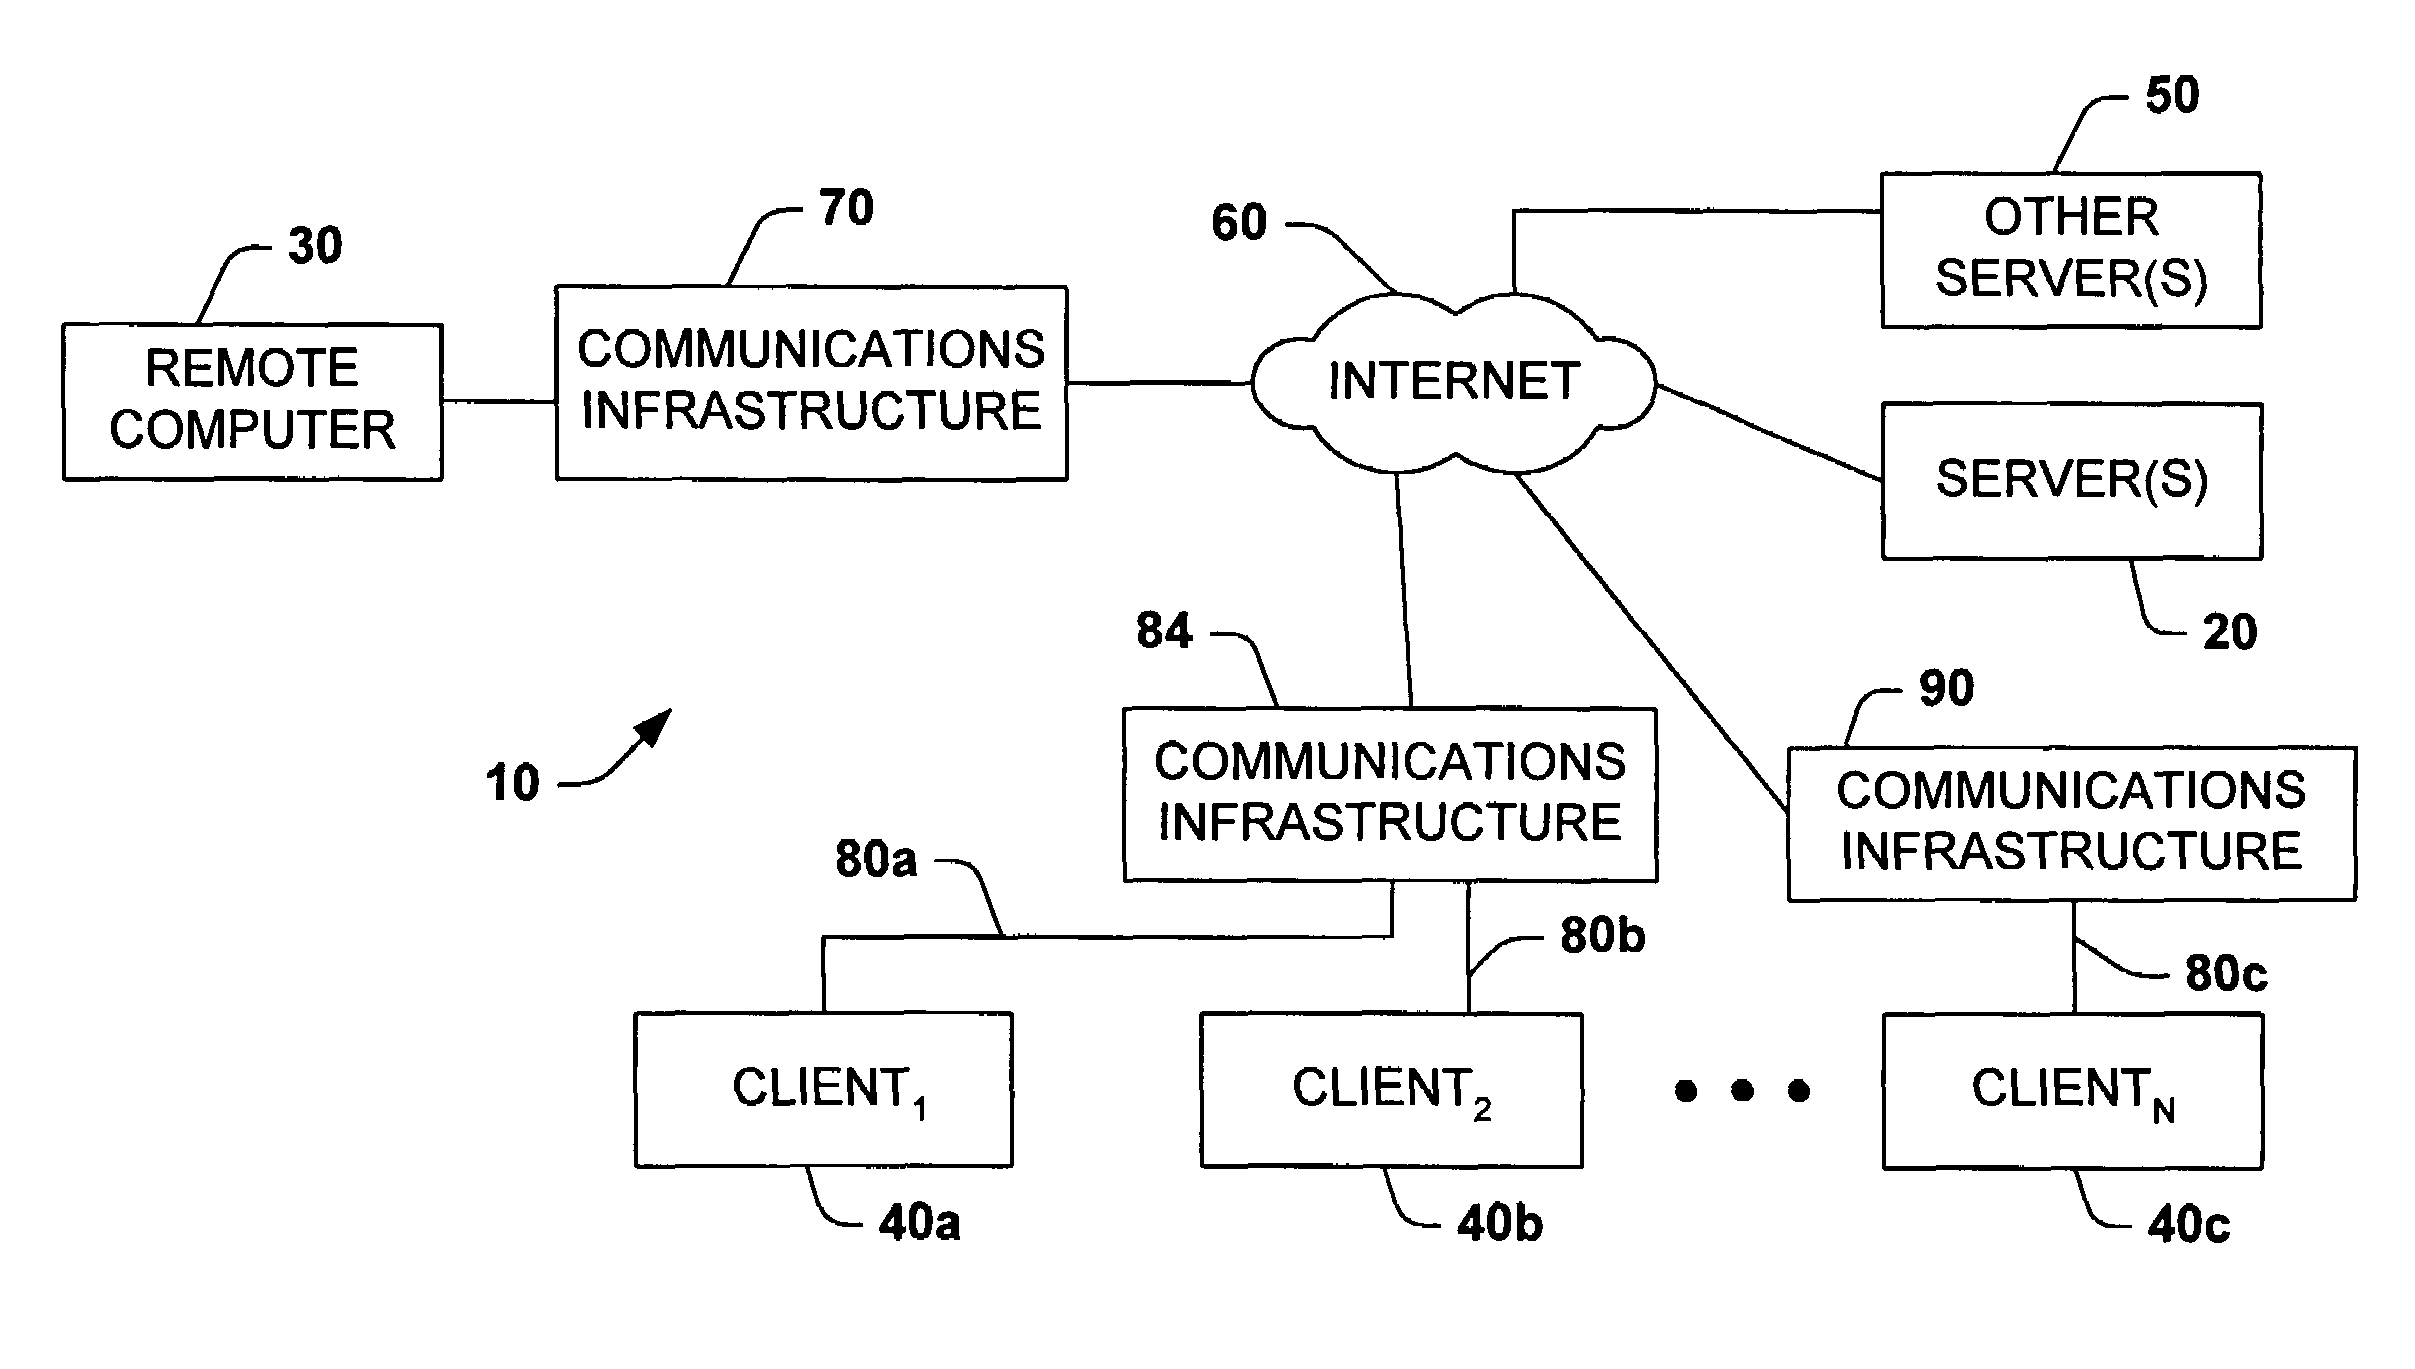 System and method for providing program criteria representing audio and/or visual programming